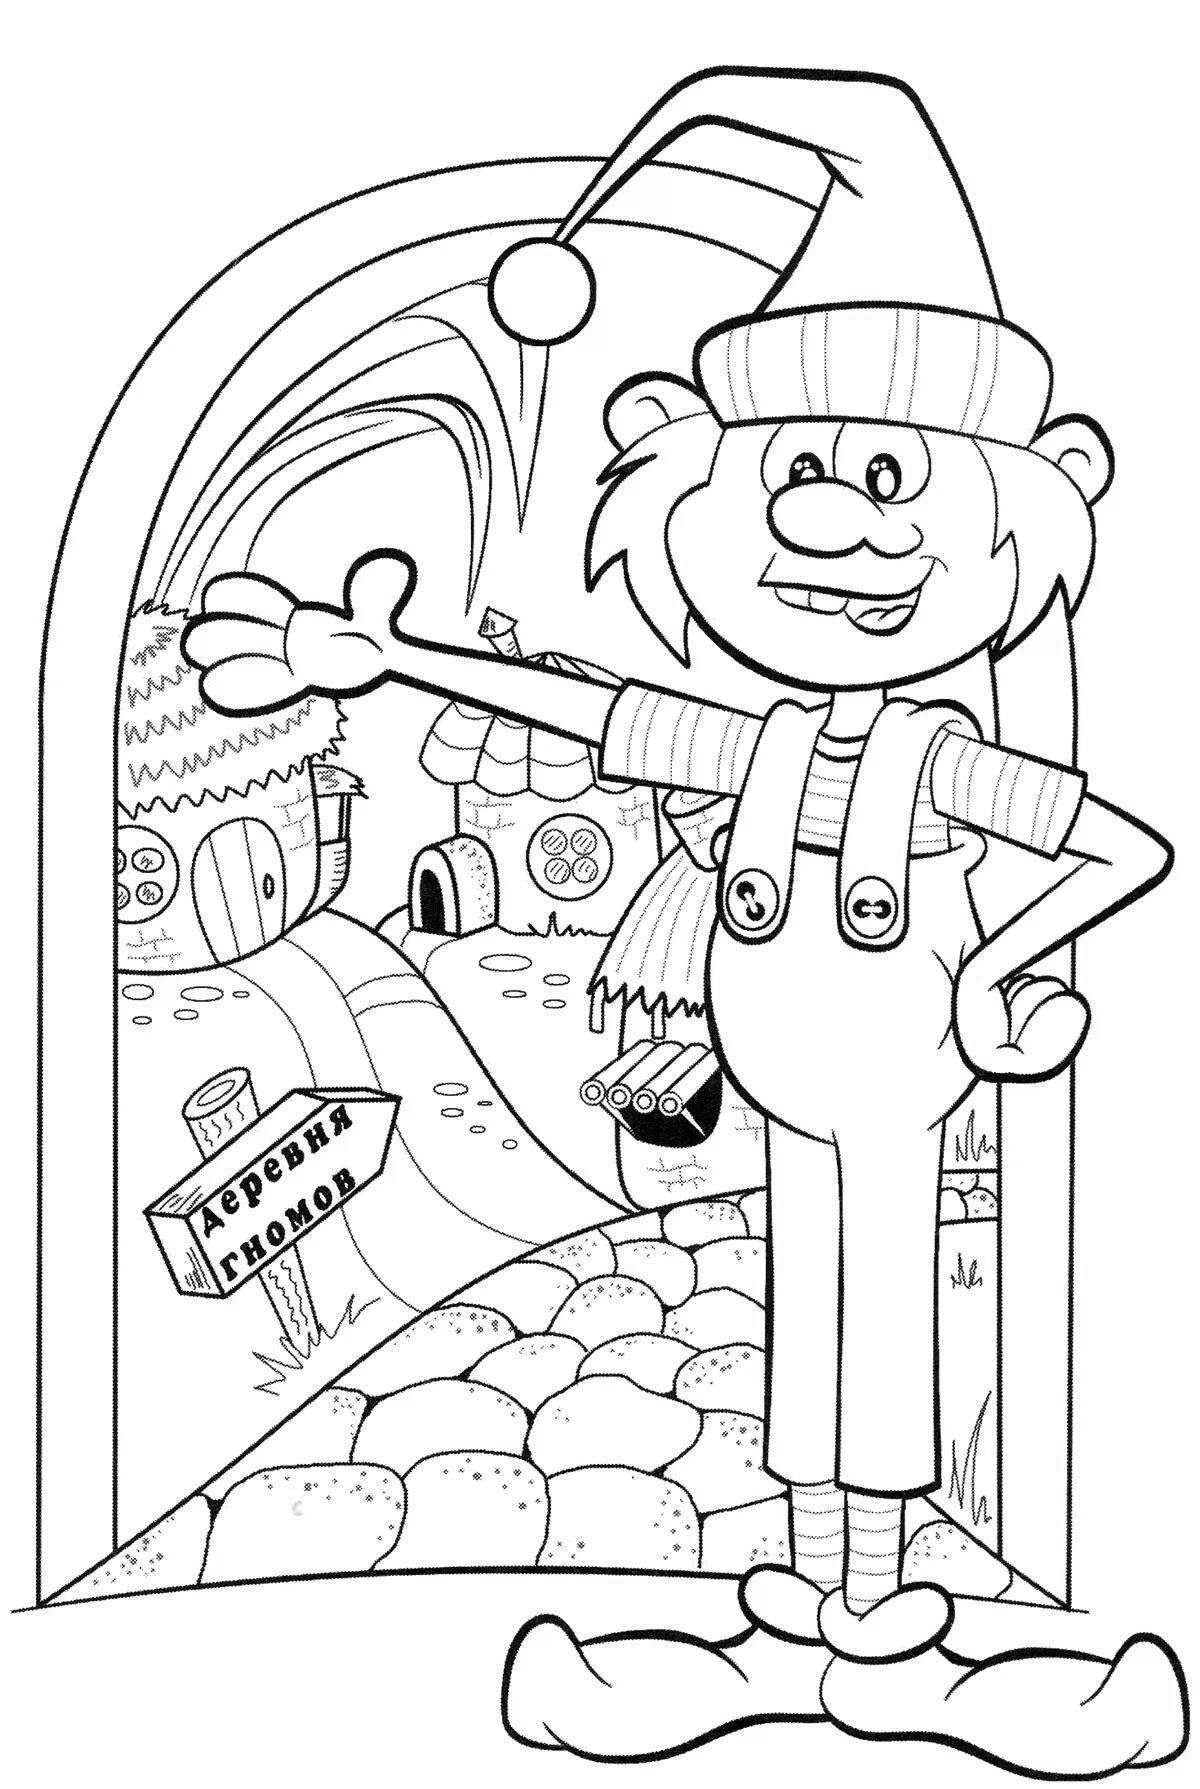 Murzilka colorful coloring page